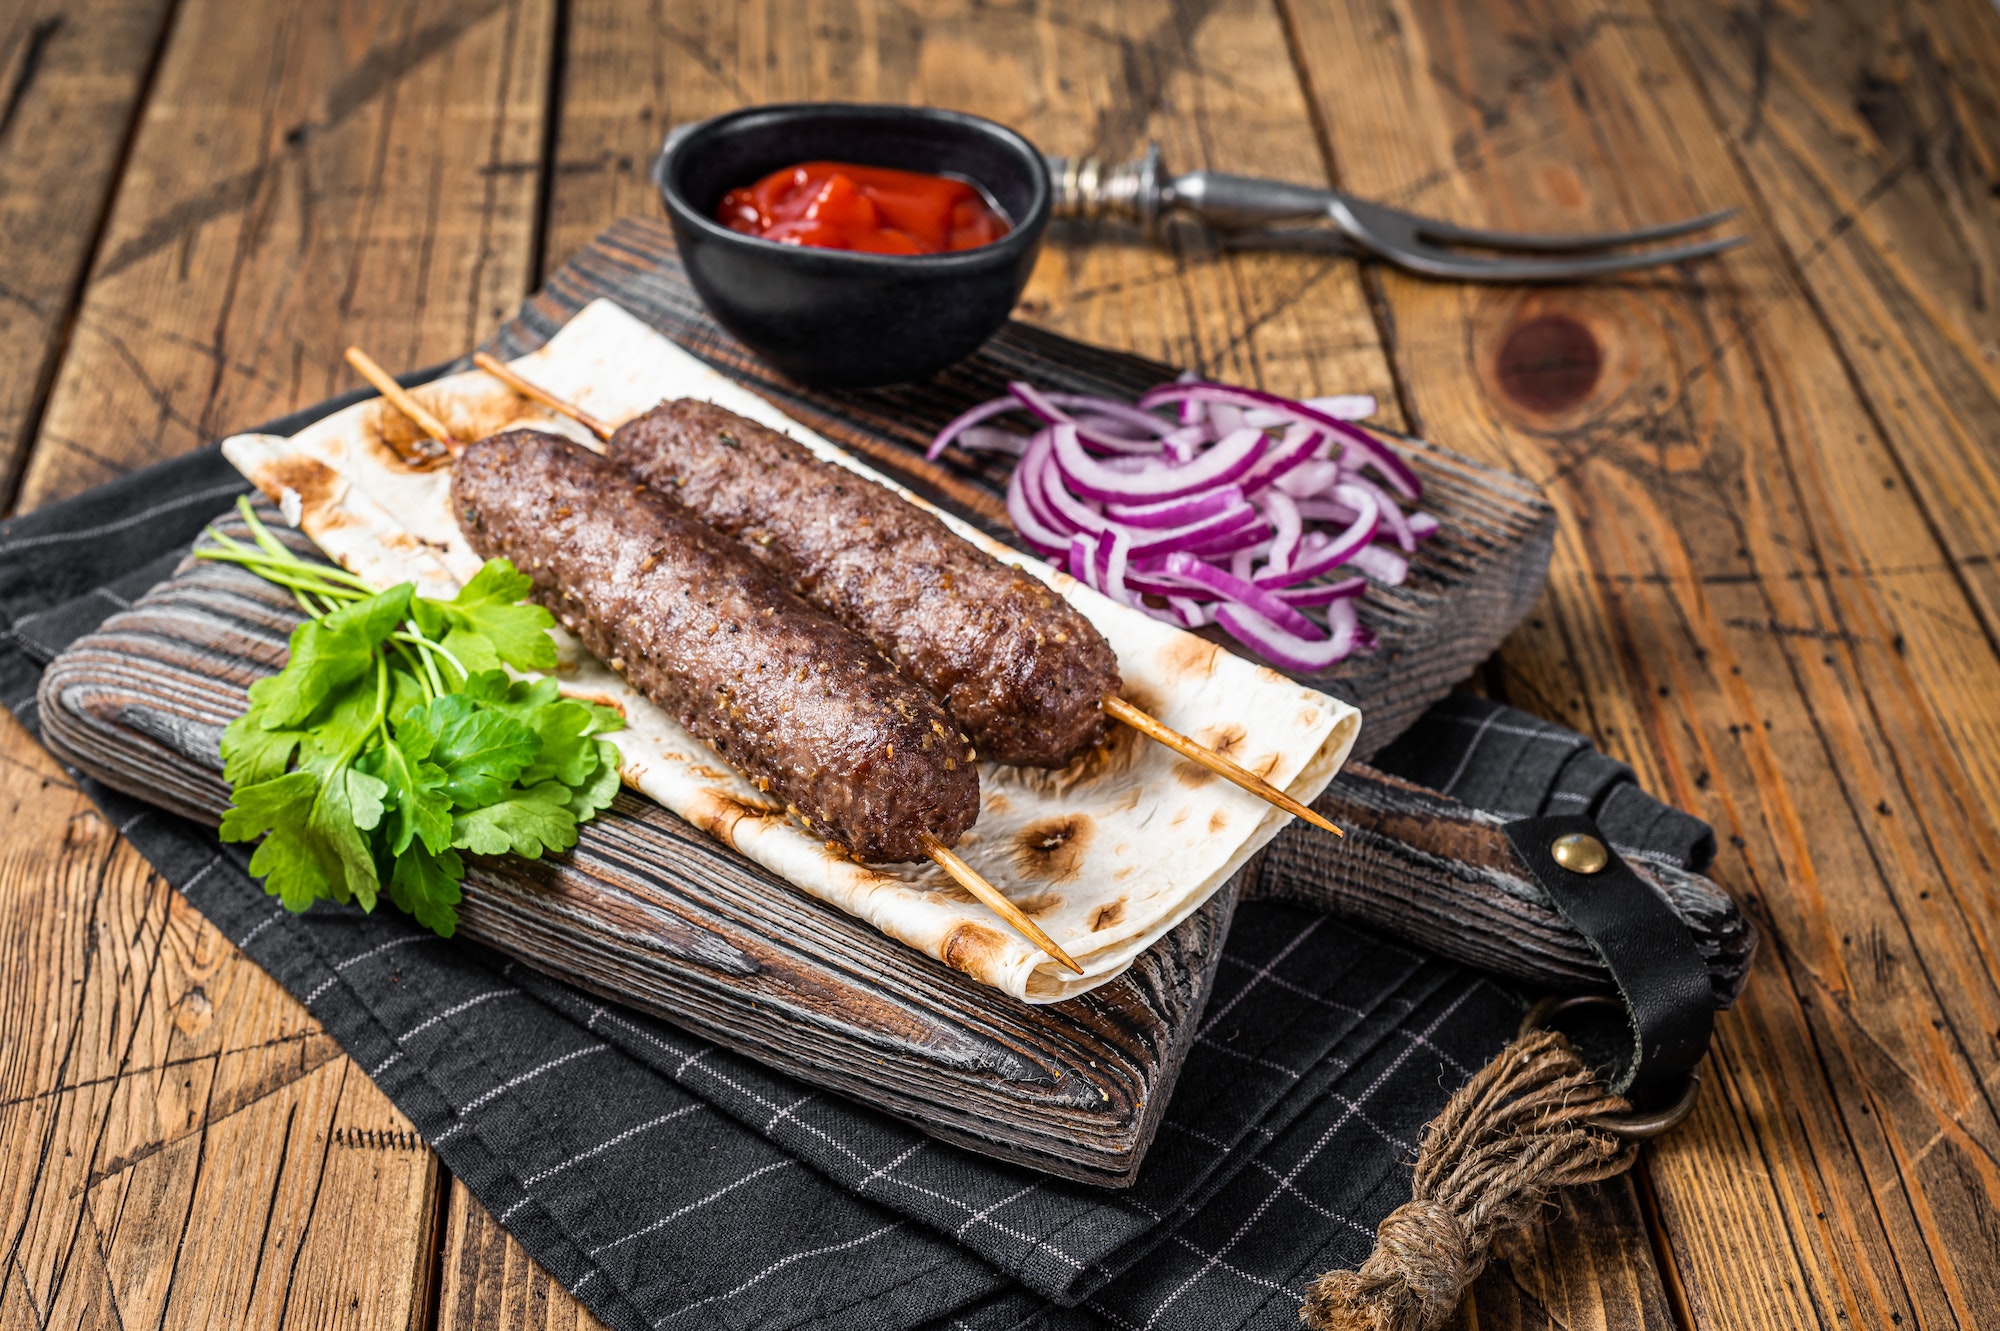 Traditional middle east kefta, kofta kebab from ground beef and lamb meat grilled on skewers served